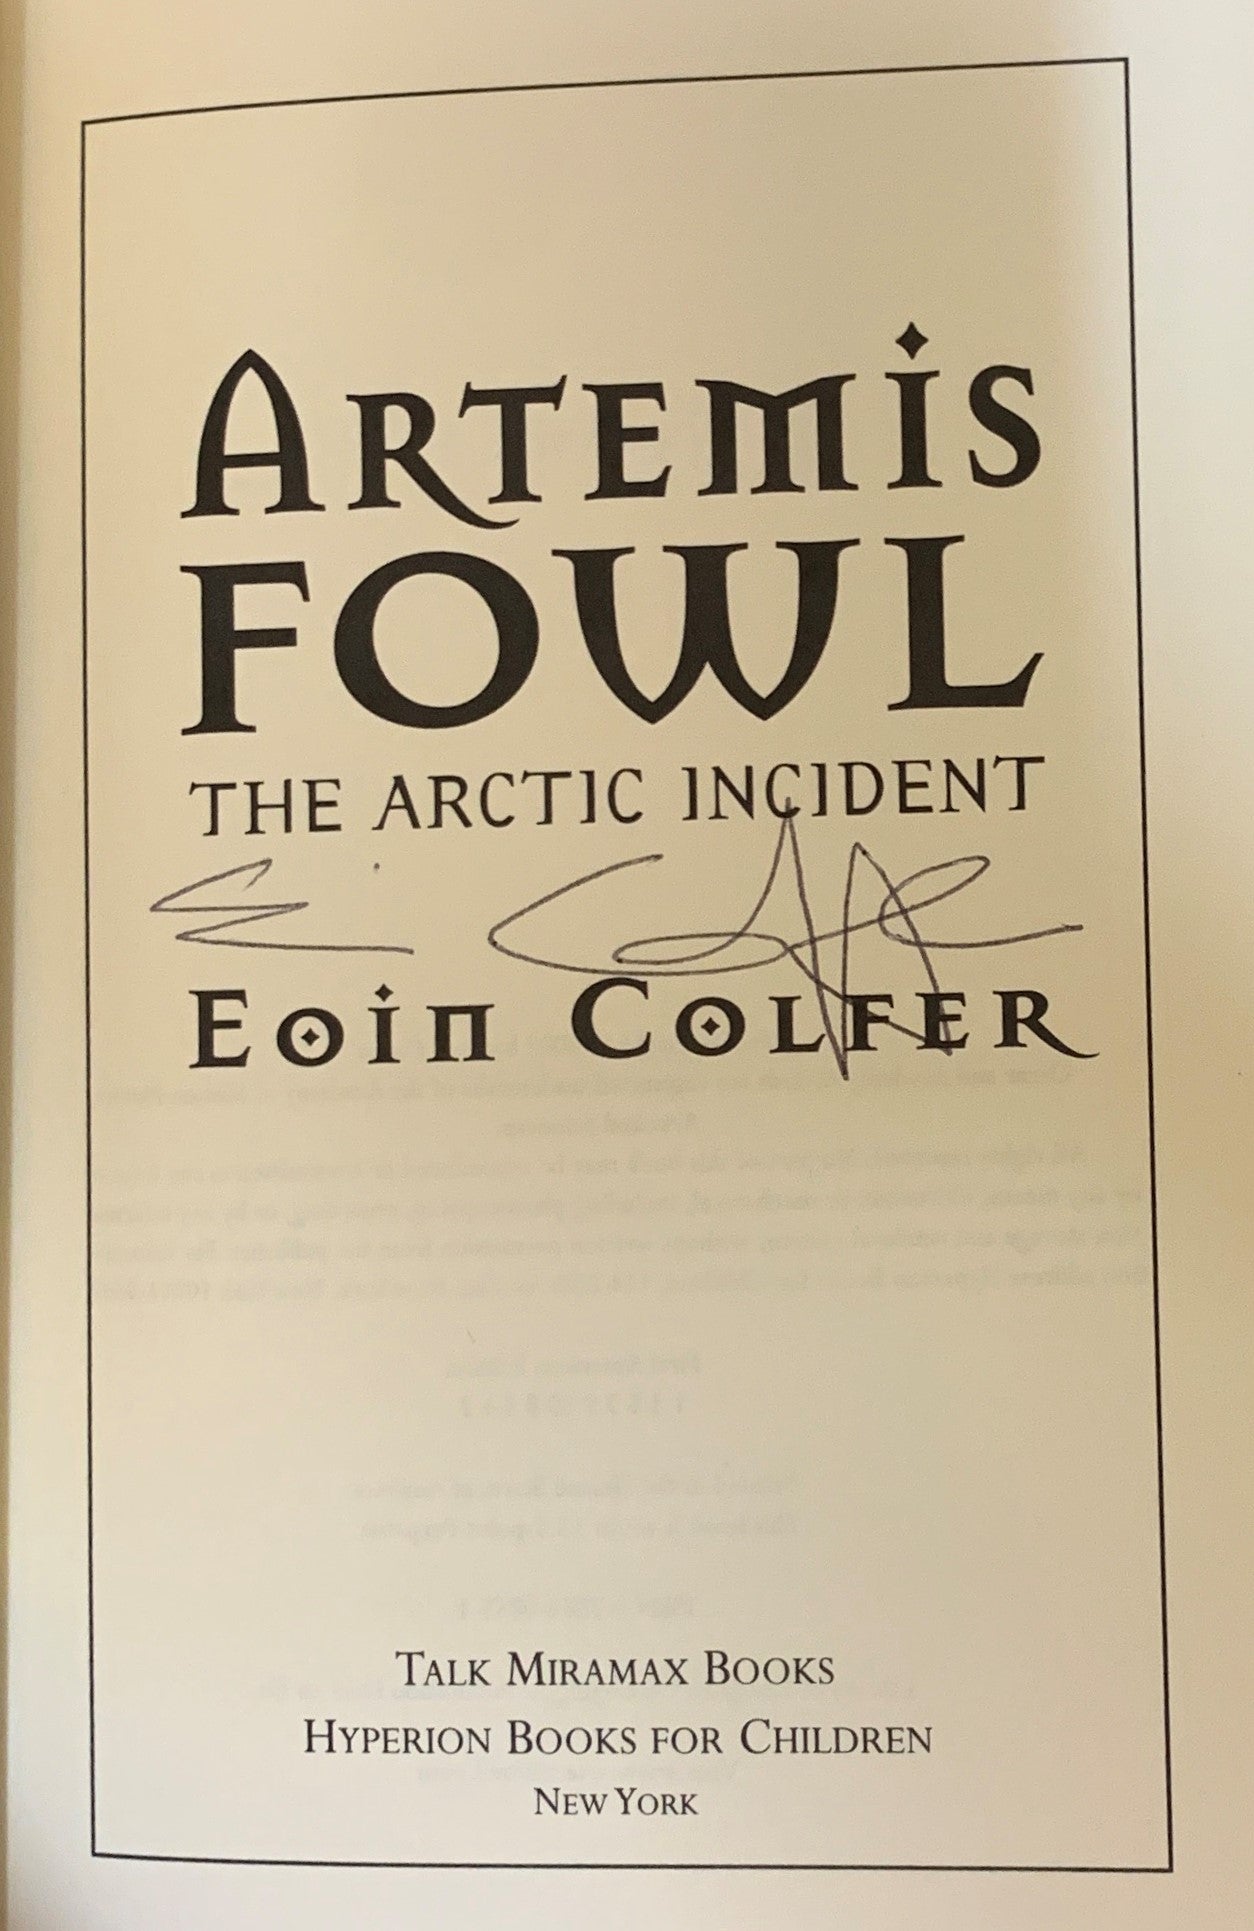 The Arctic Incident (Artemis Fowl, Book 2) - Paperback By Eoin Colfer -  Fiction